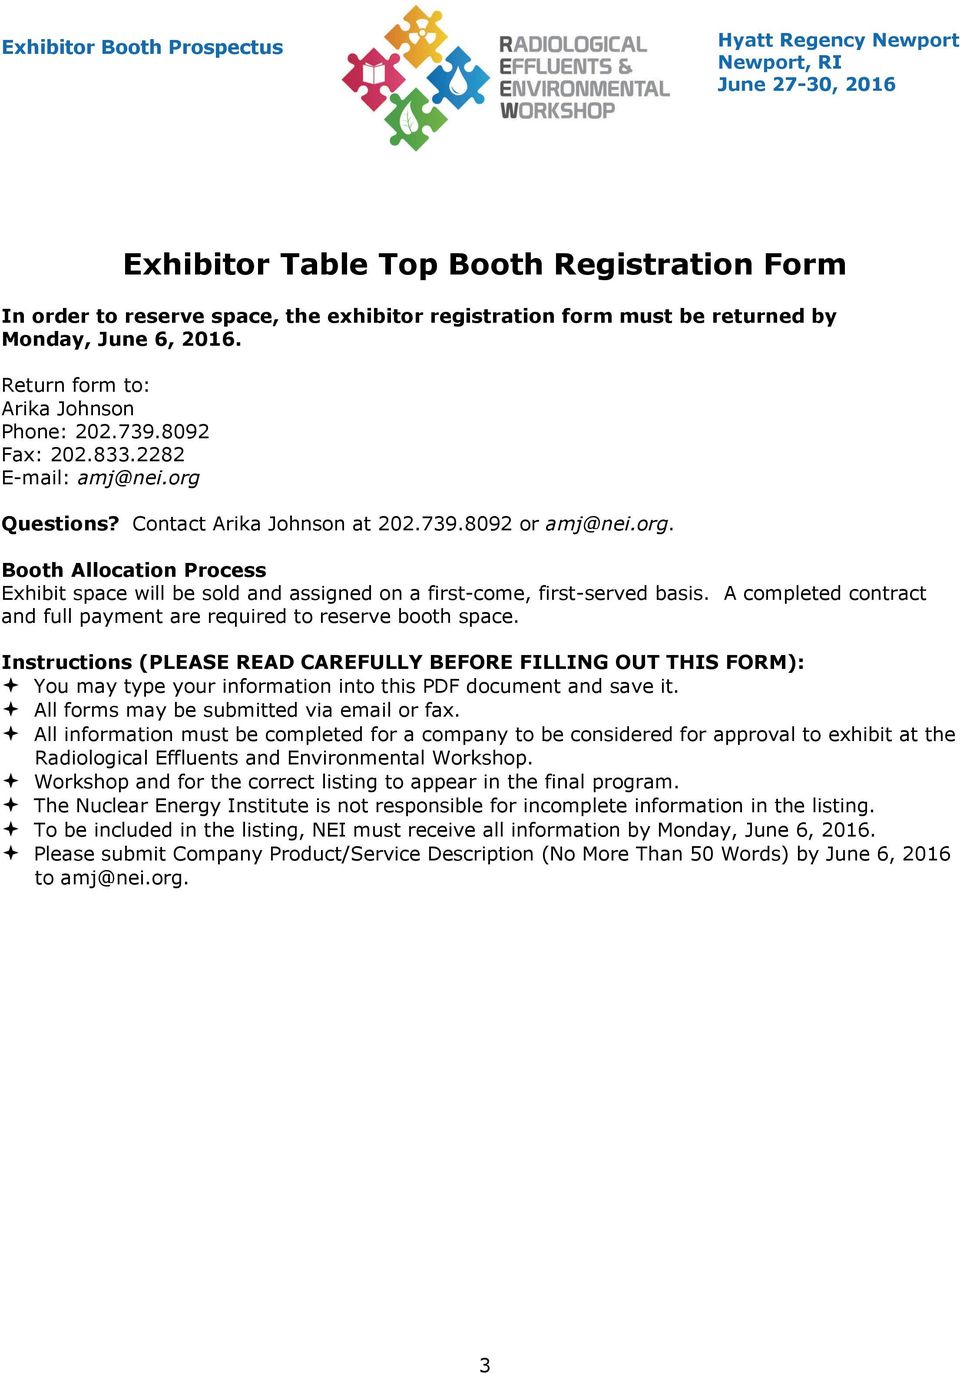 A completed contract and full payment are required to reserve booth space.